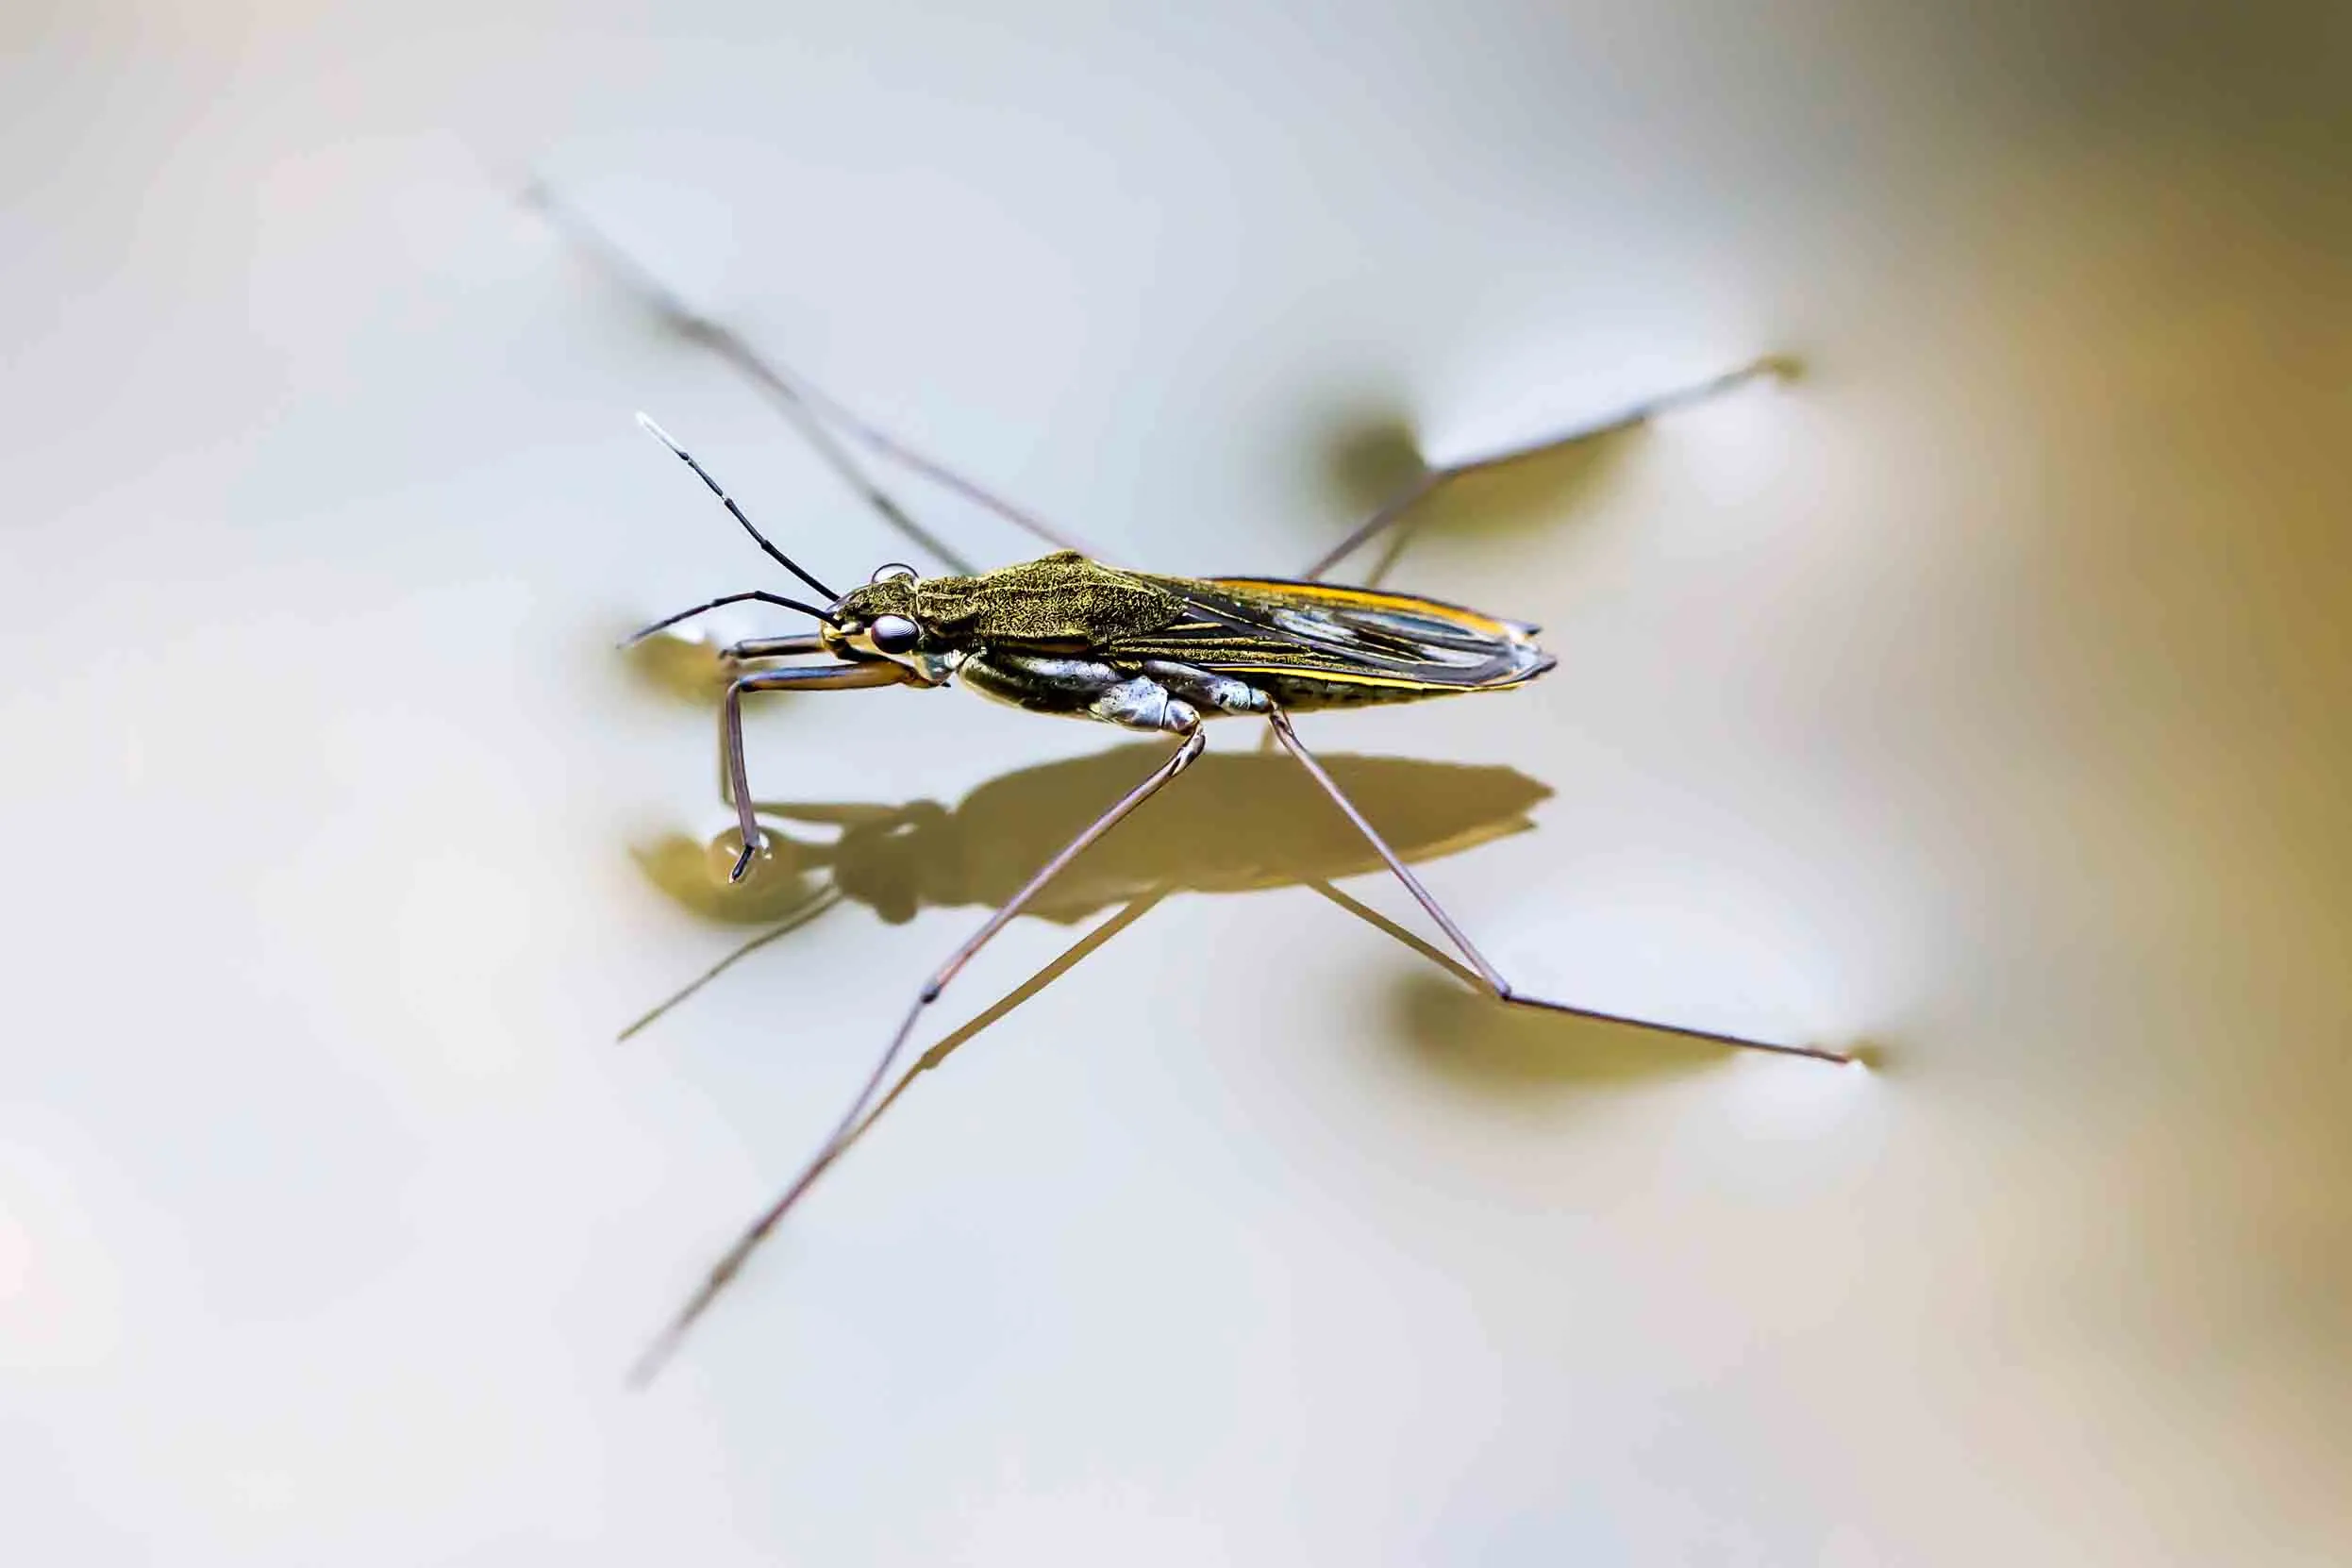 A pond skater stretches out over water without breaking its surface tension.